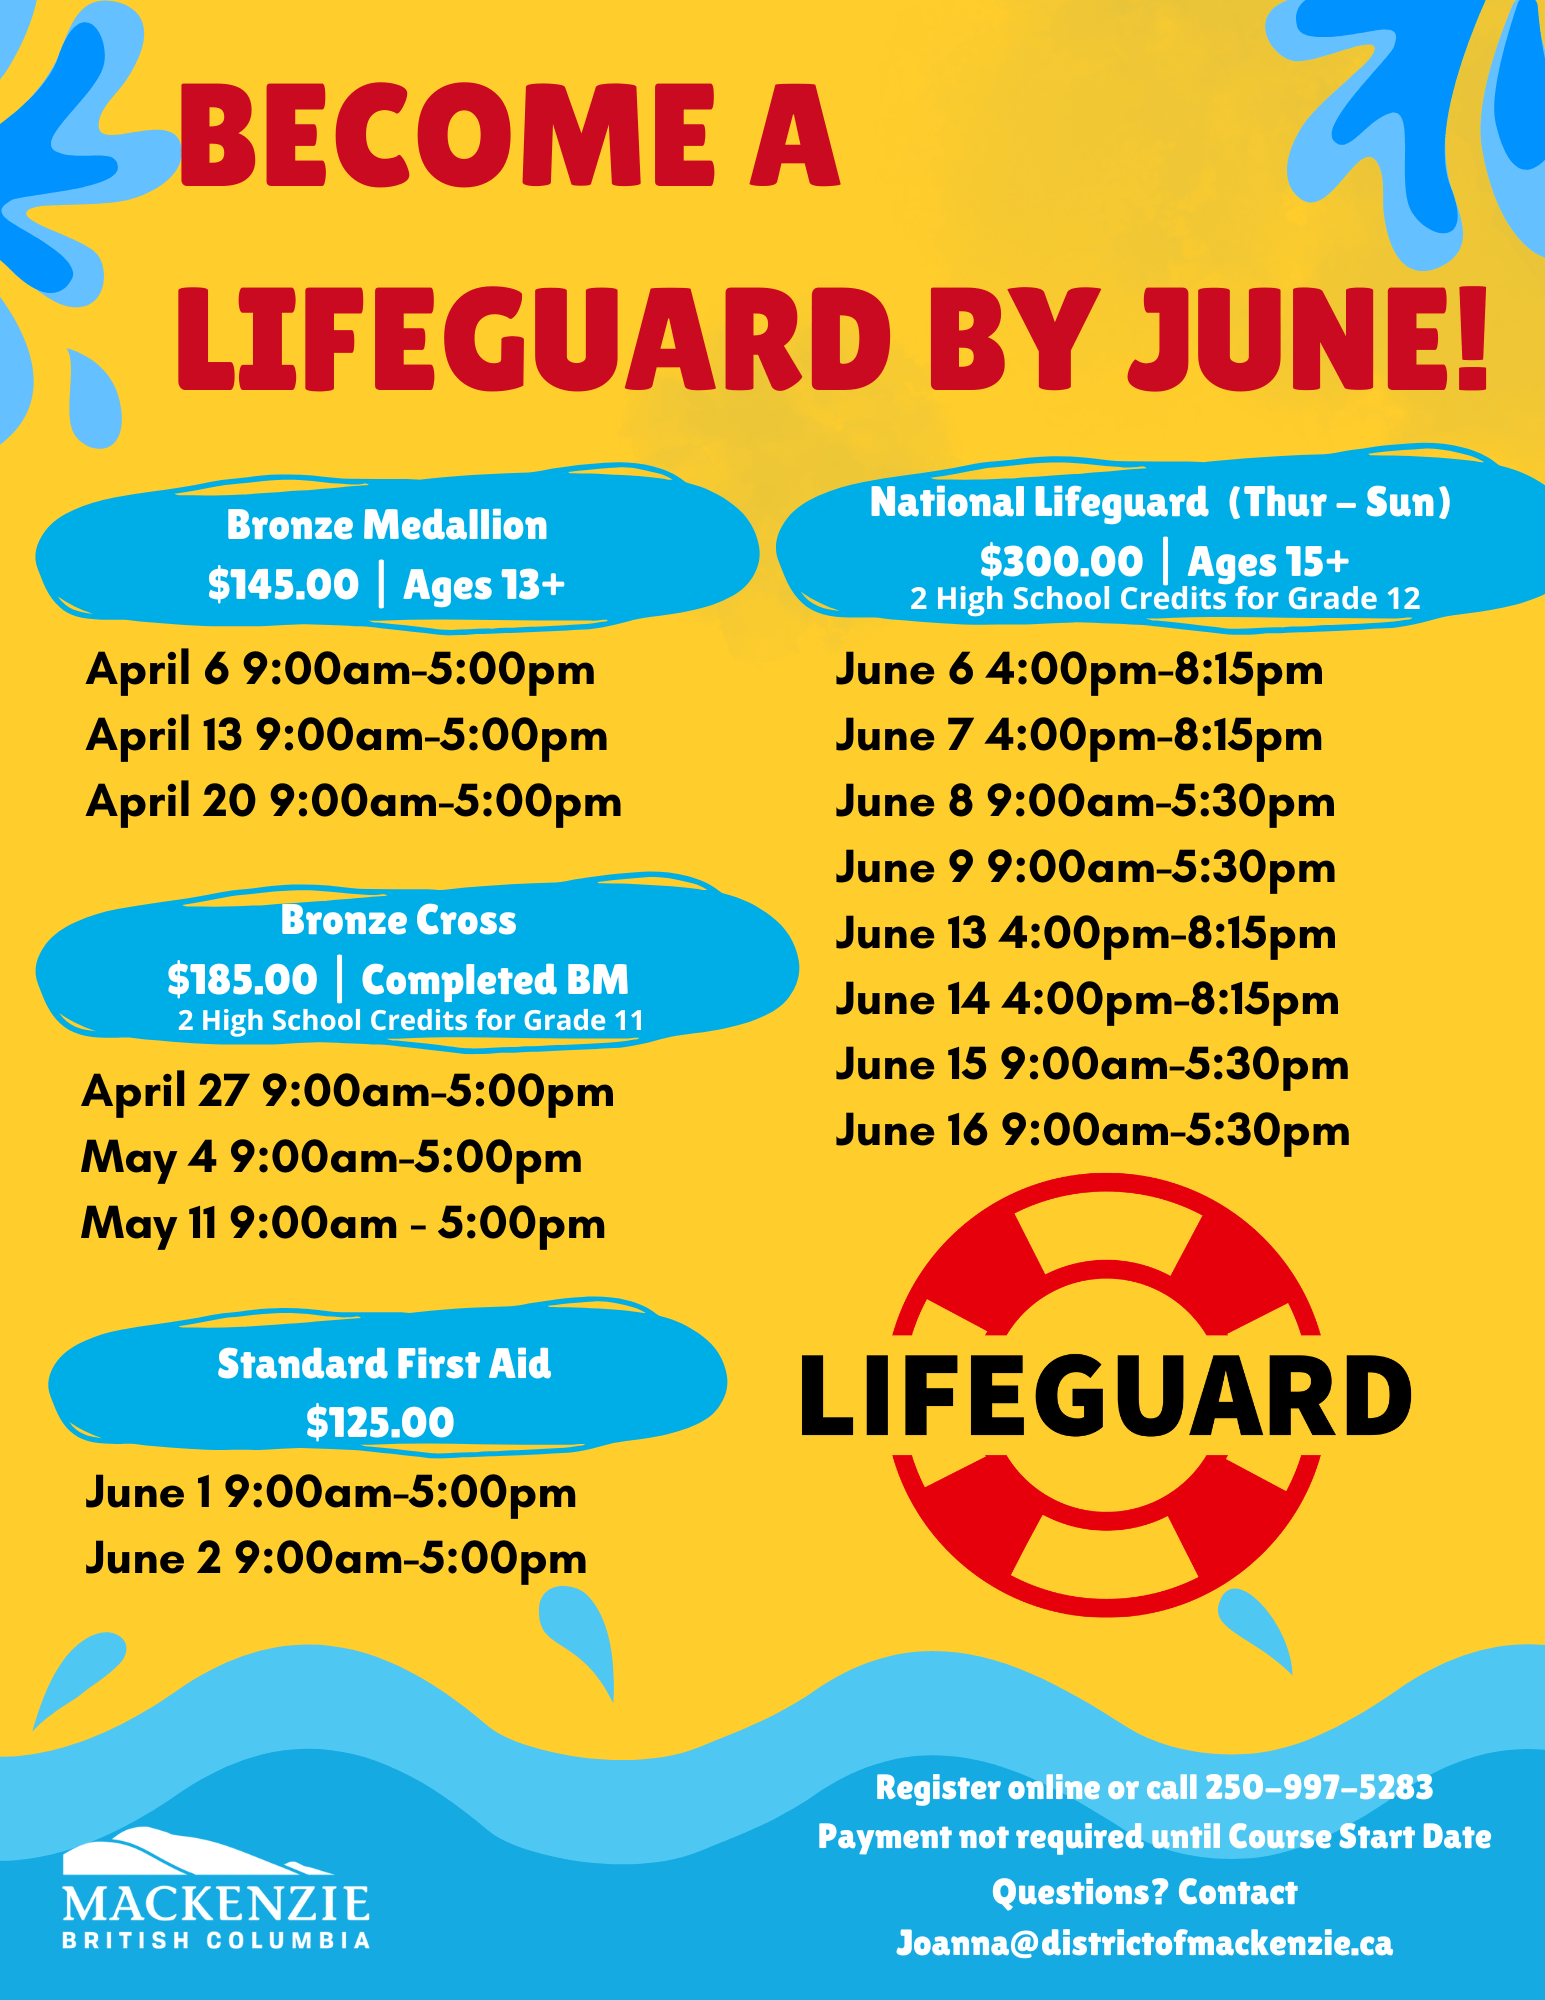 Become a Lifeguard by June 